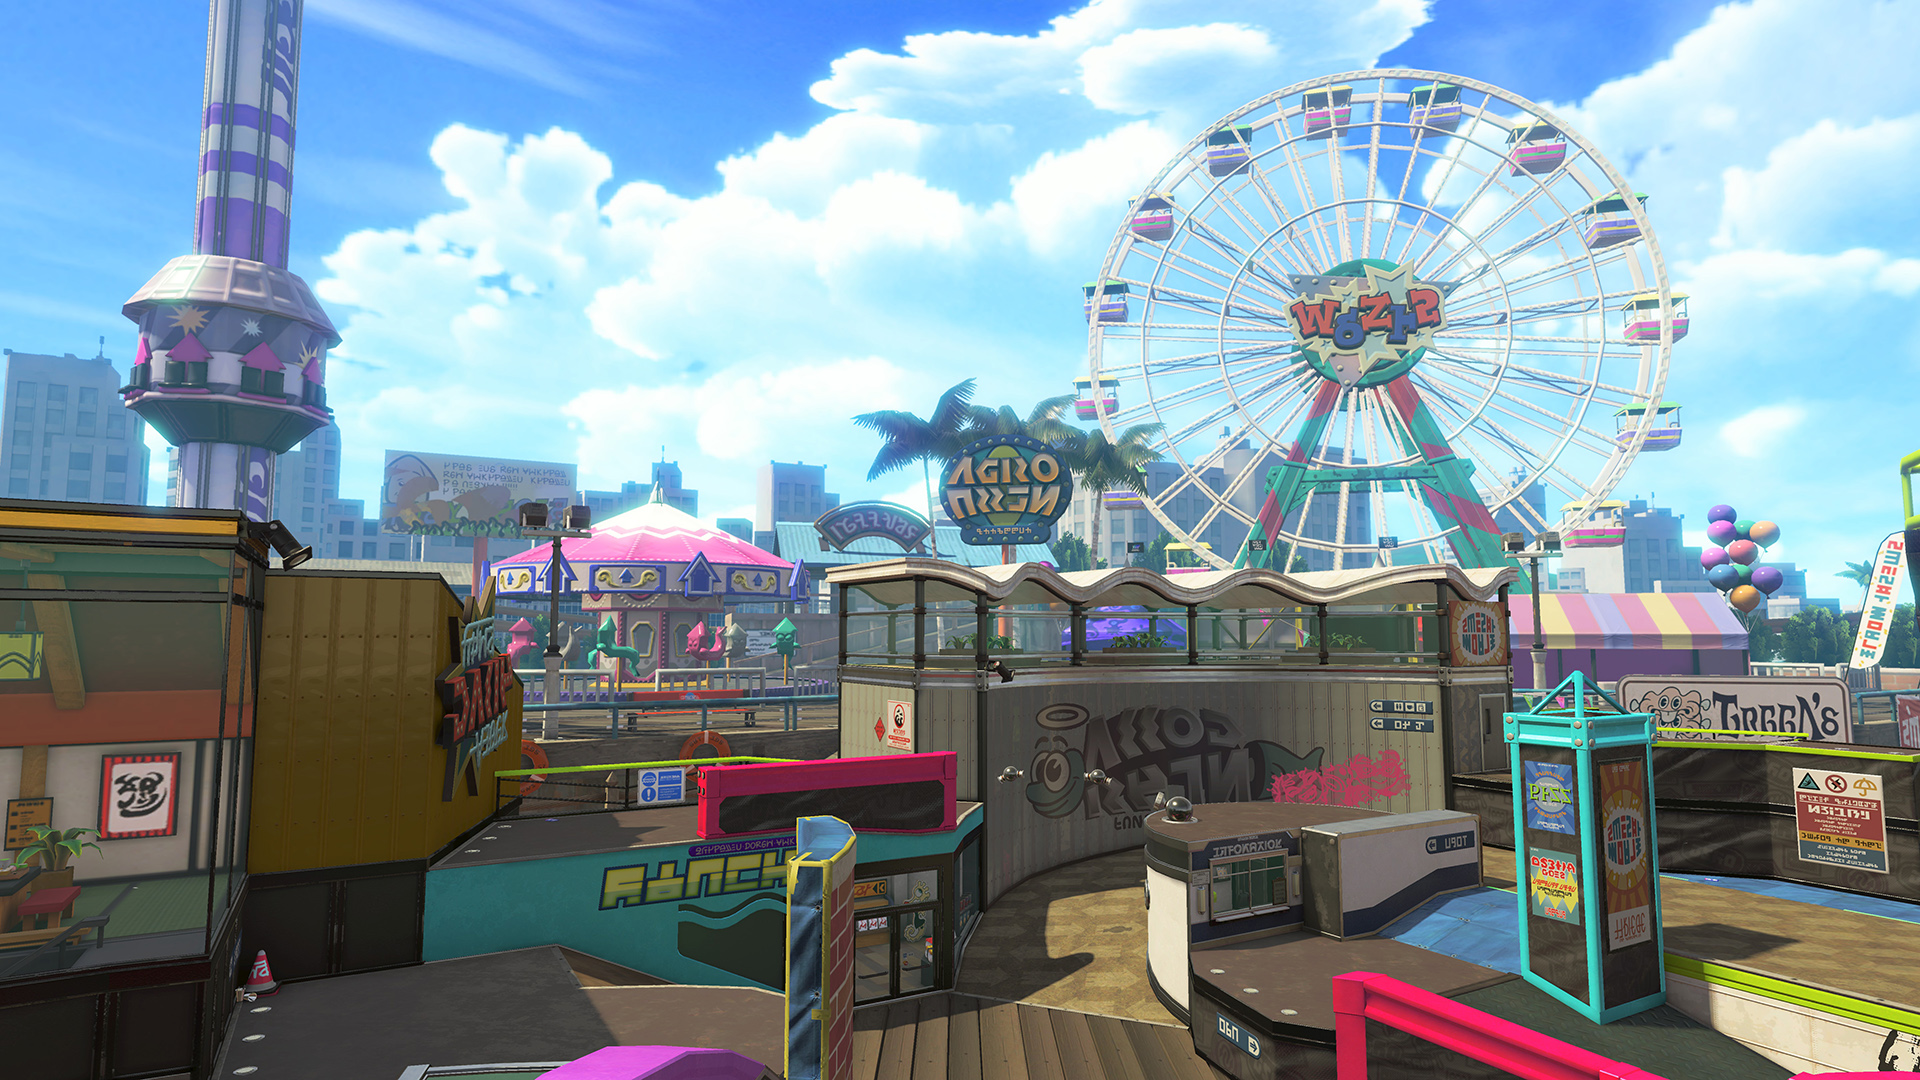 A large theme park map in the game